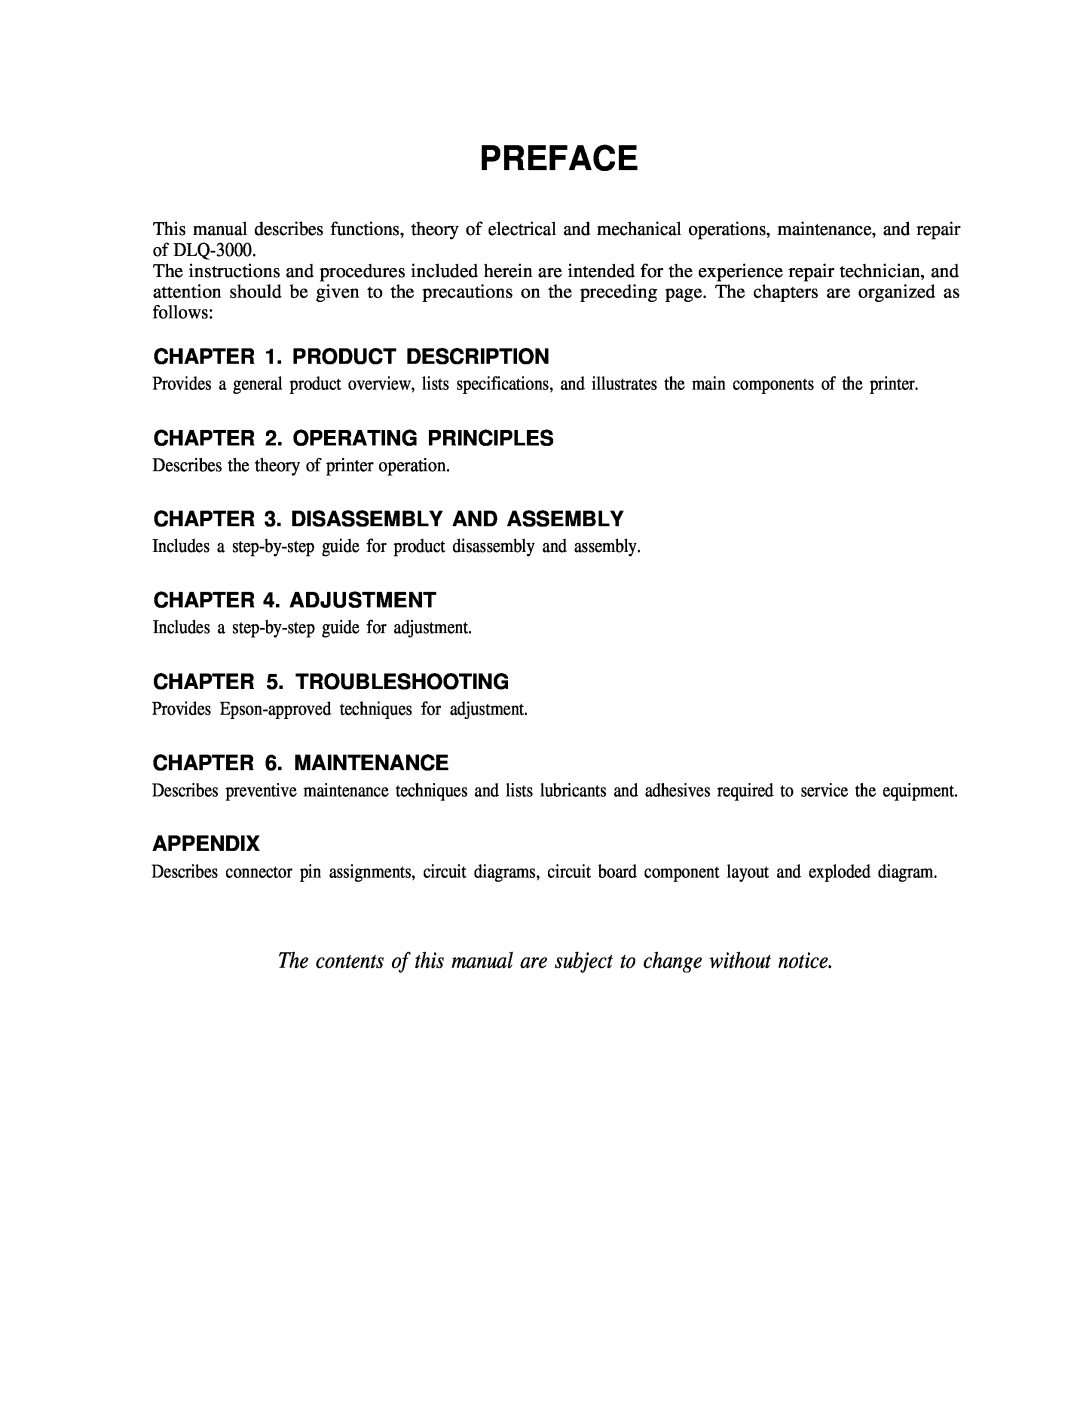 Epson DLQ-3000 Preface, The contents of this manual are subject to change without notice, Product Description, Adjustment 